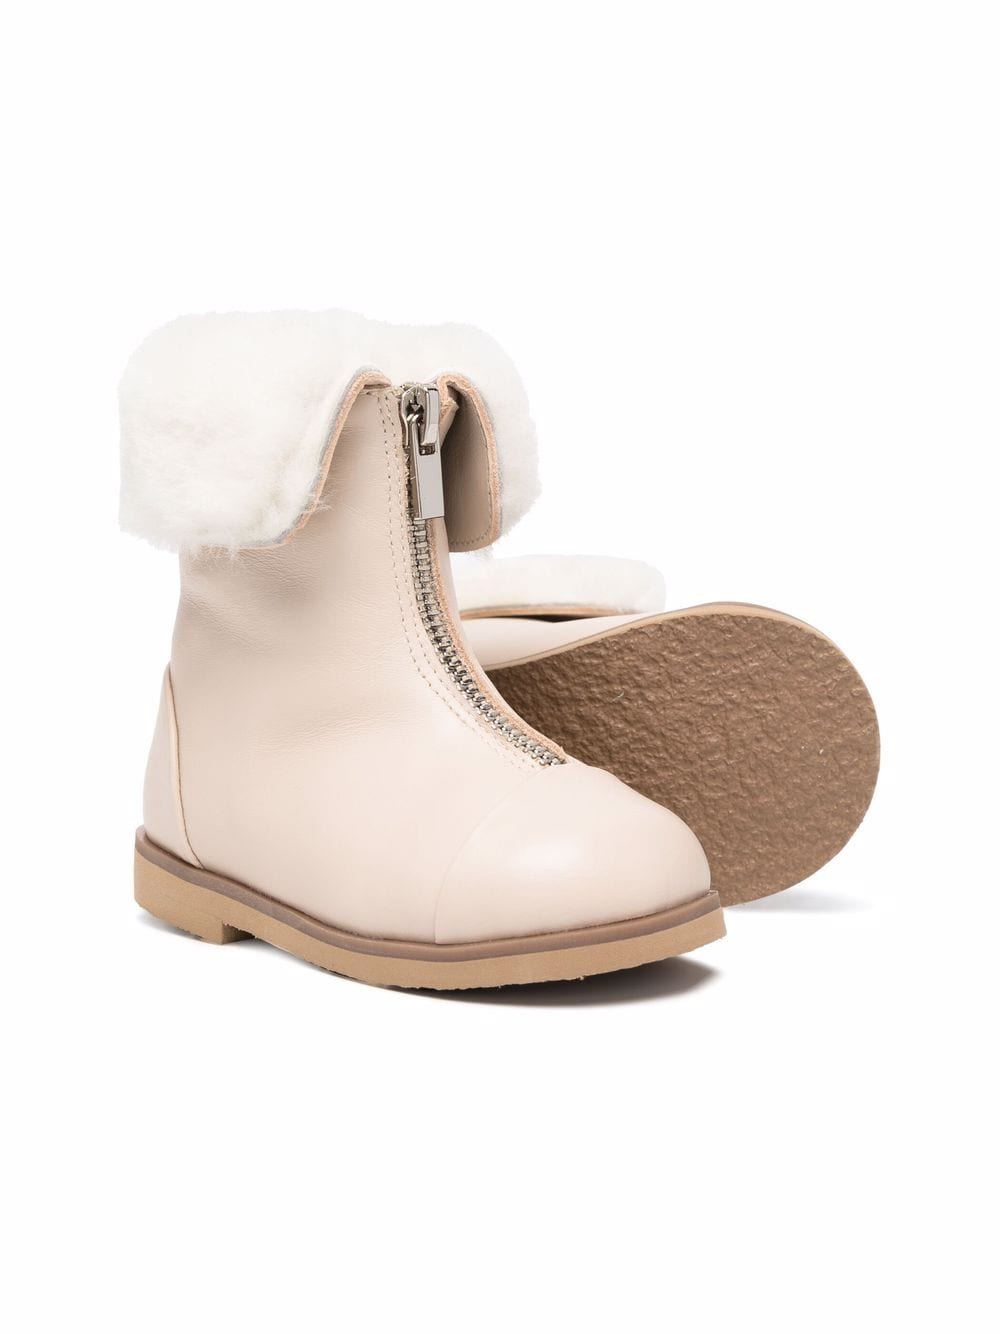 Image 2 of Age of Innocence shearling-lined leather ankle boots